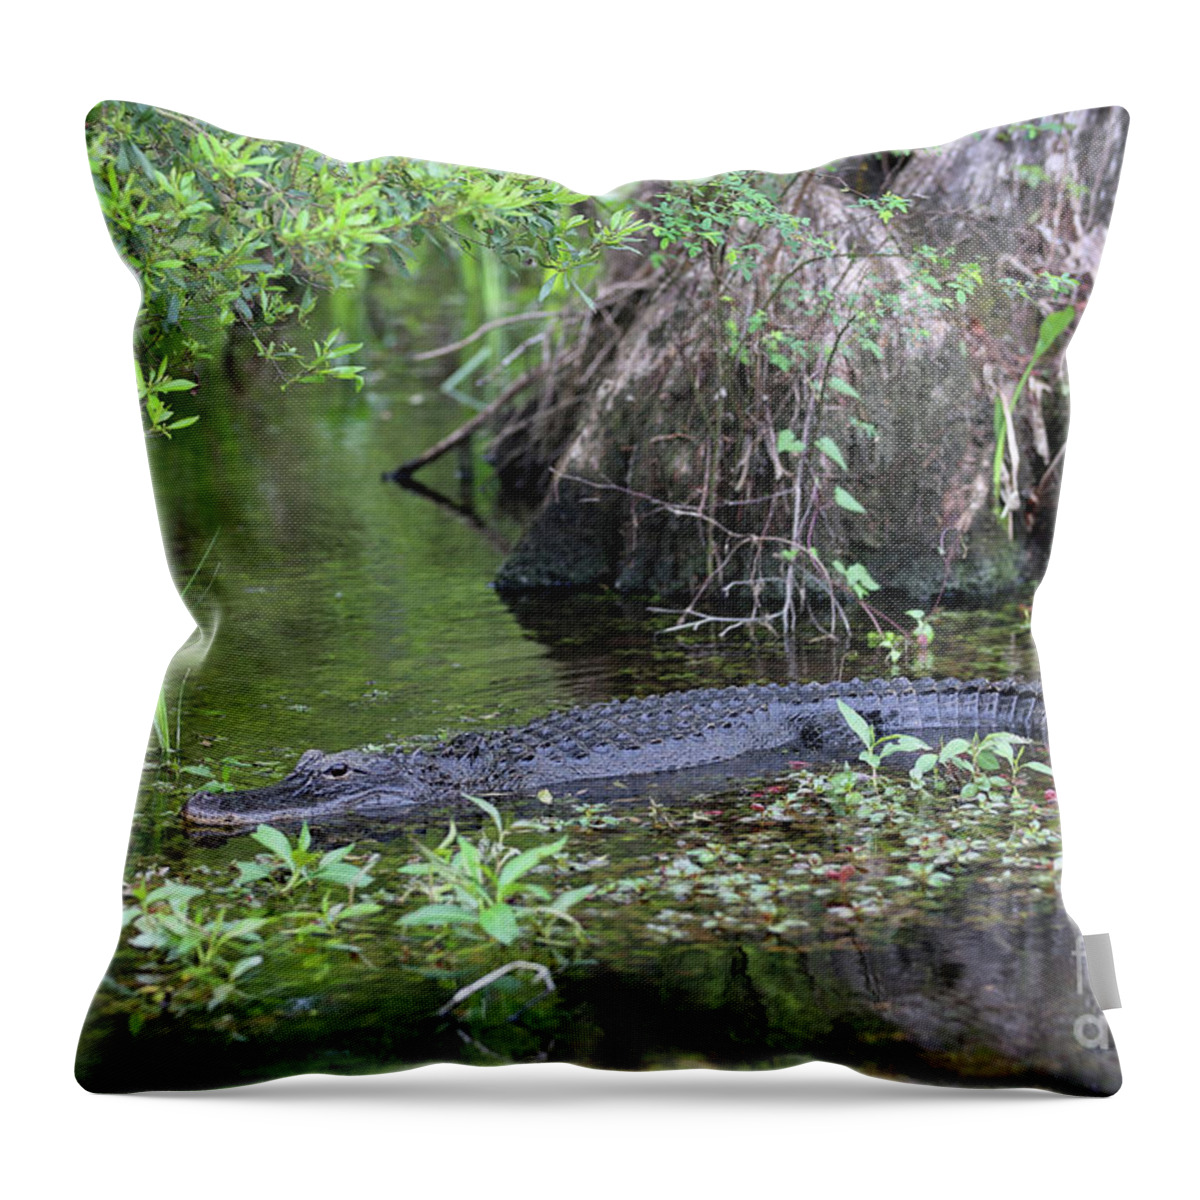 Swamp Throw Pillow featuring the photograph Sitting Pretty Gator by Carol Groenen